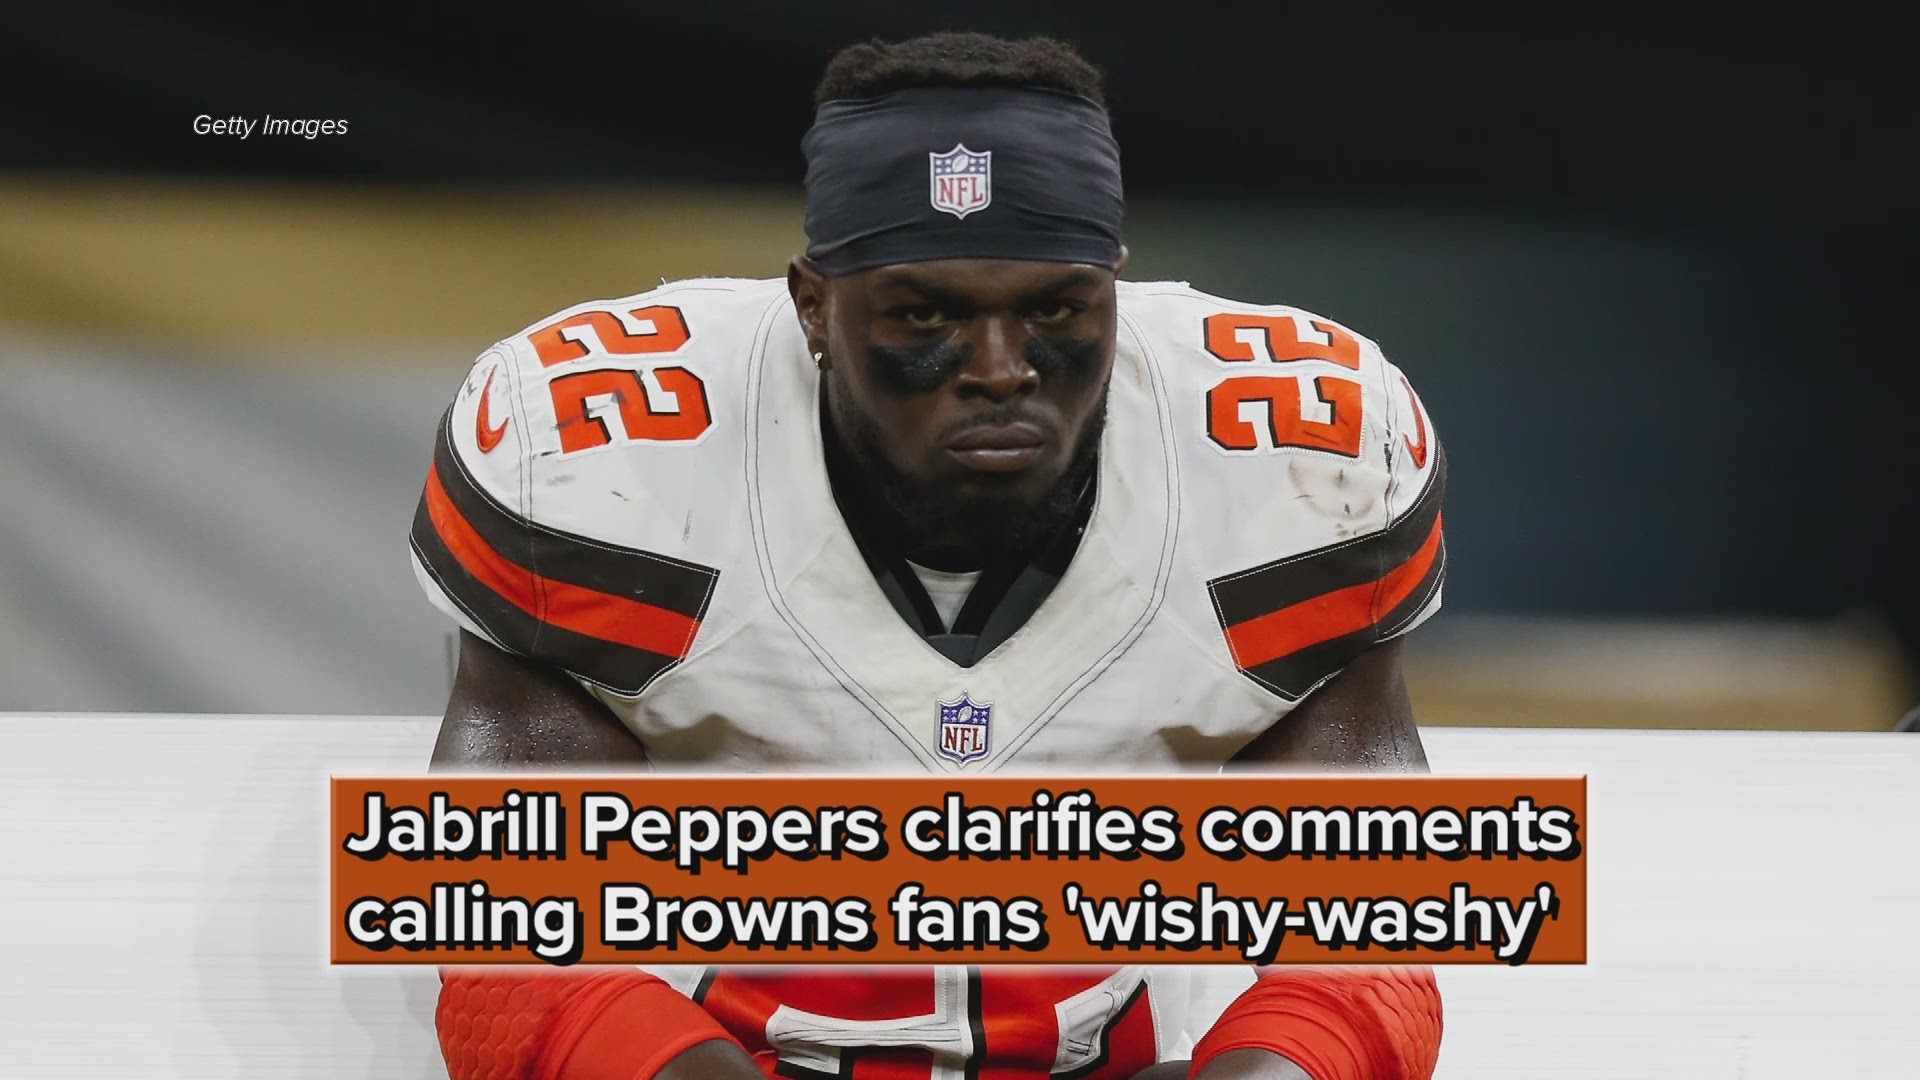 Jabrill Peppers clarifies comments calling Cleveland Browns fans 'wishy-washy'